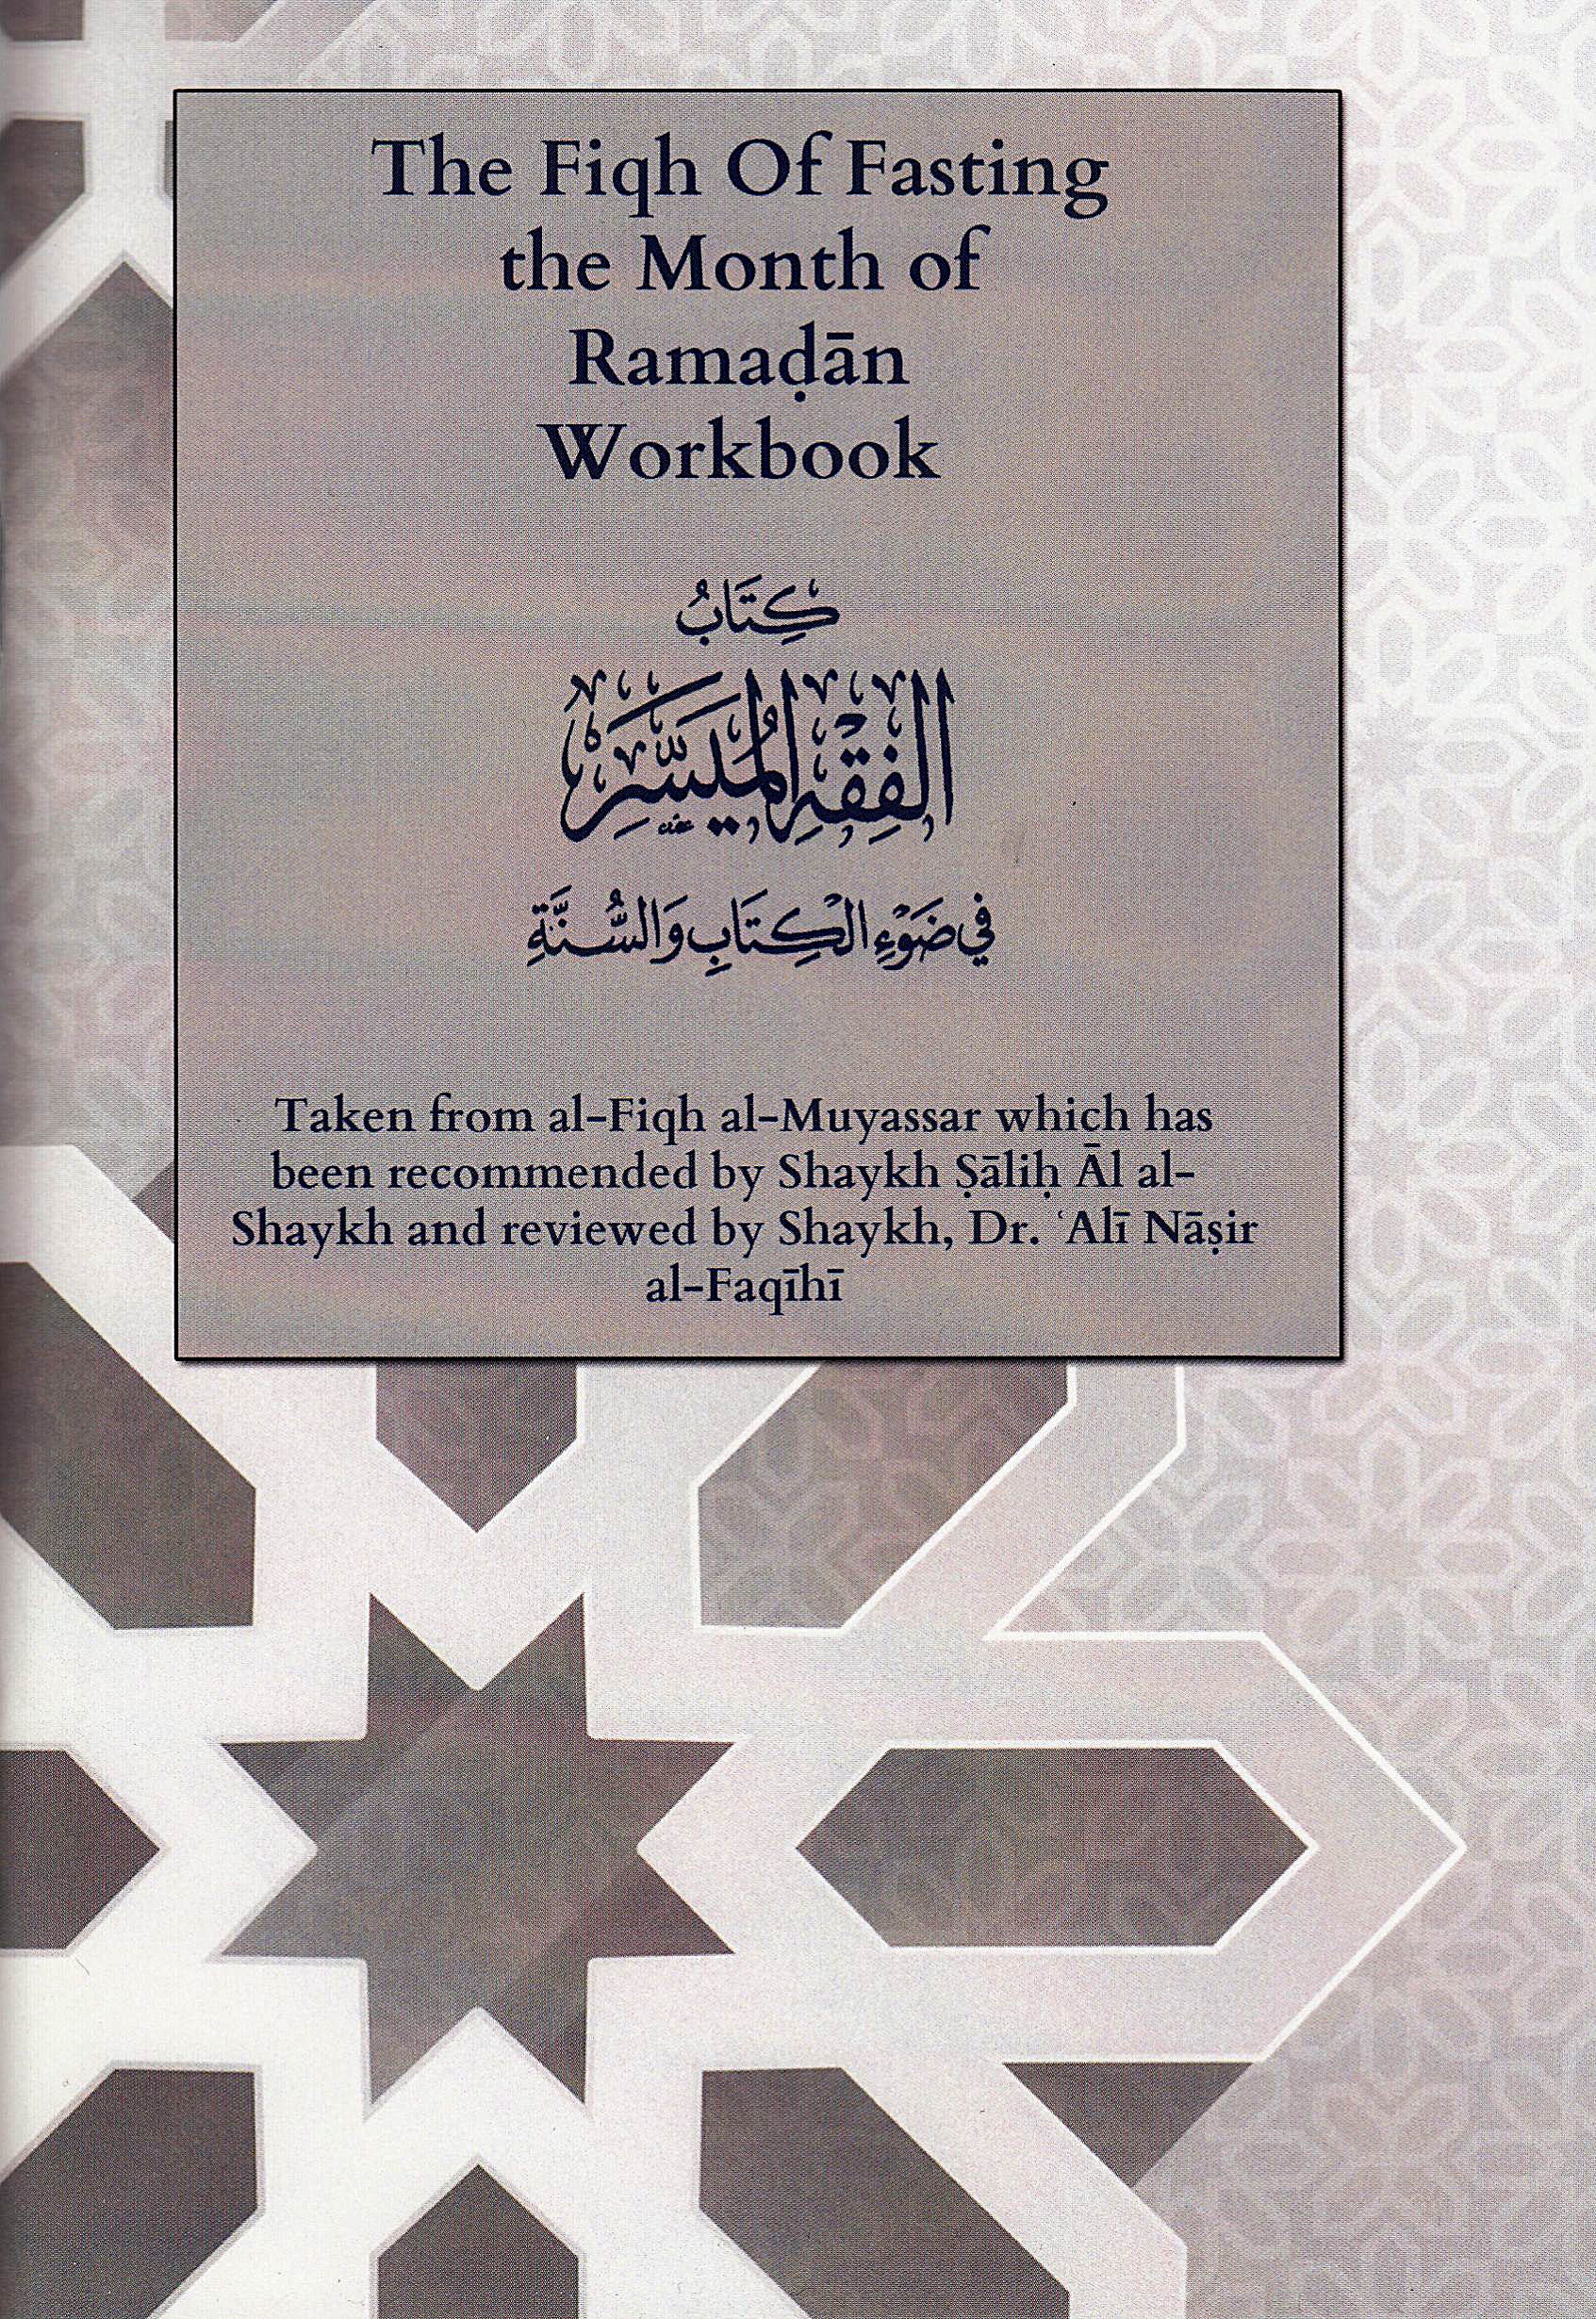 The Fiqh Of Fasting the Month Of Ramaḍān Workbook - This has been taken from al-Fiqh al-Muyassar, which is a book that has been recommended by Shaykh Ṣāliḥ Āl al-Shaykh and reviewed by Shaykh, Dr. ʿAlī Nāṣir al-Faqīhī